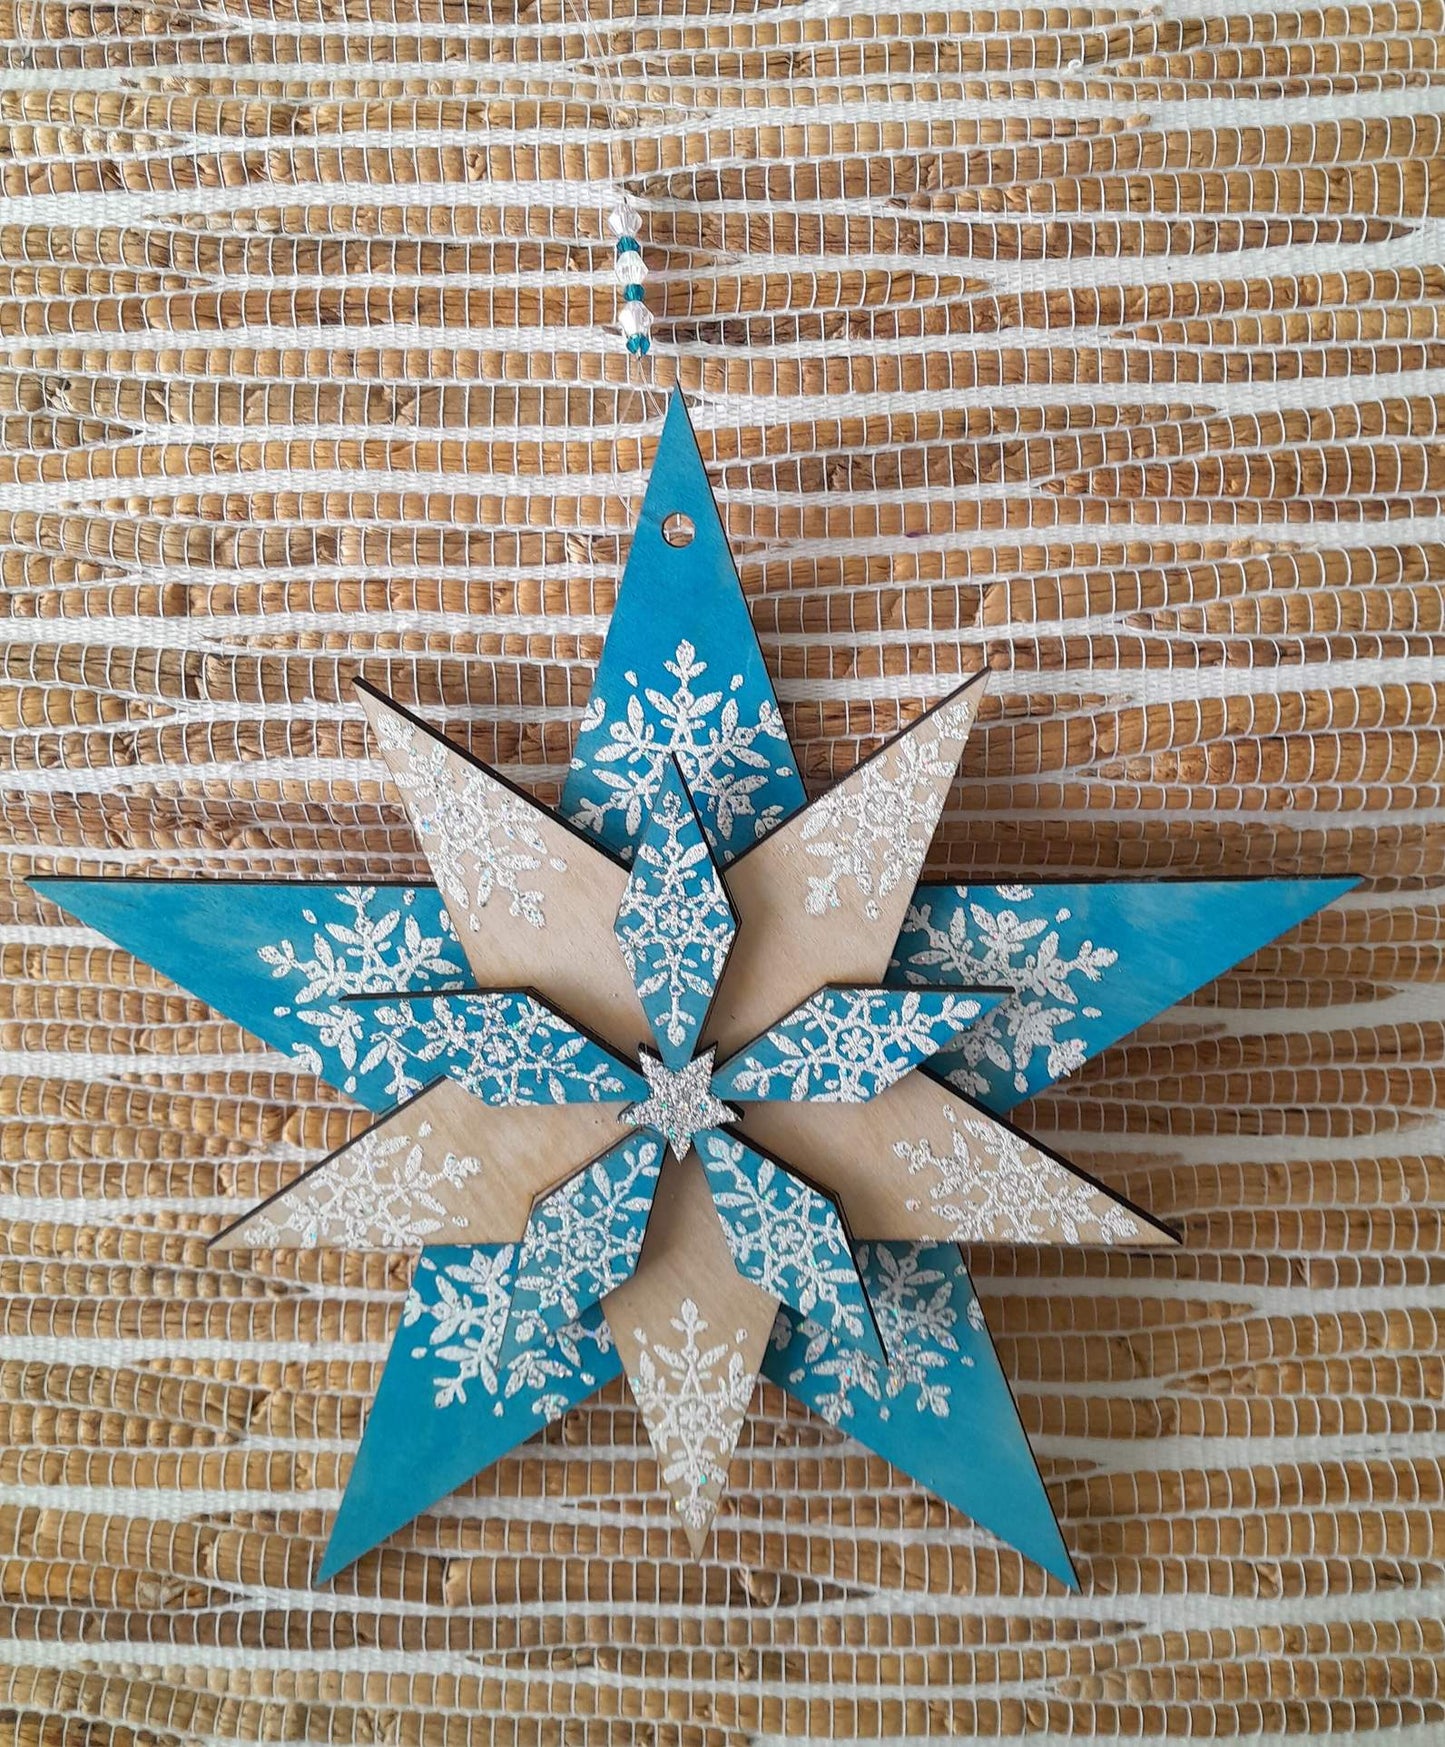 Large Hand made wooden star - tuquoise, white and natural wood